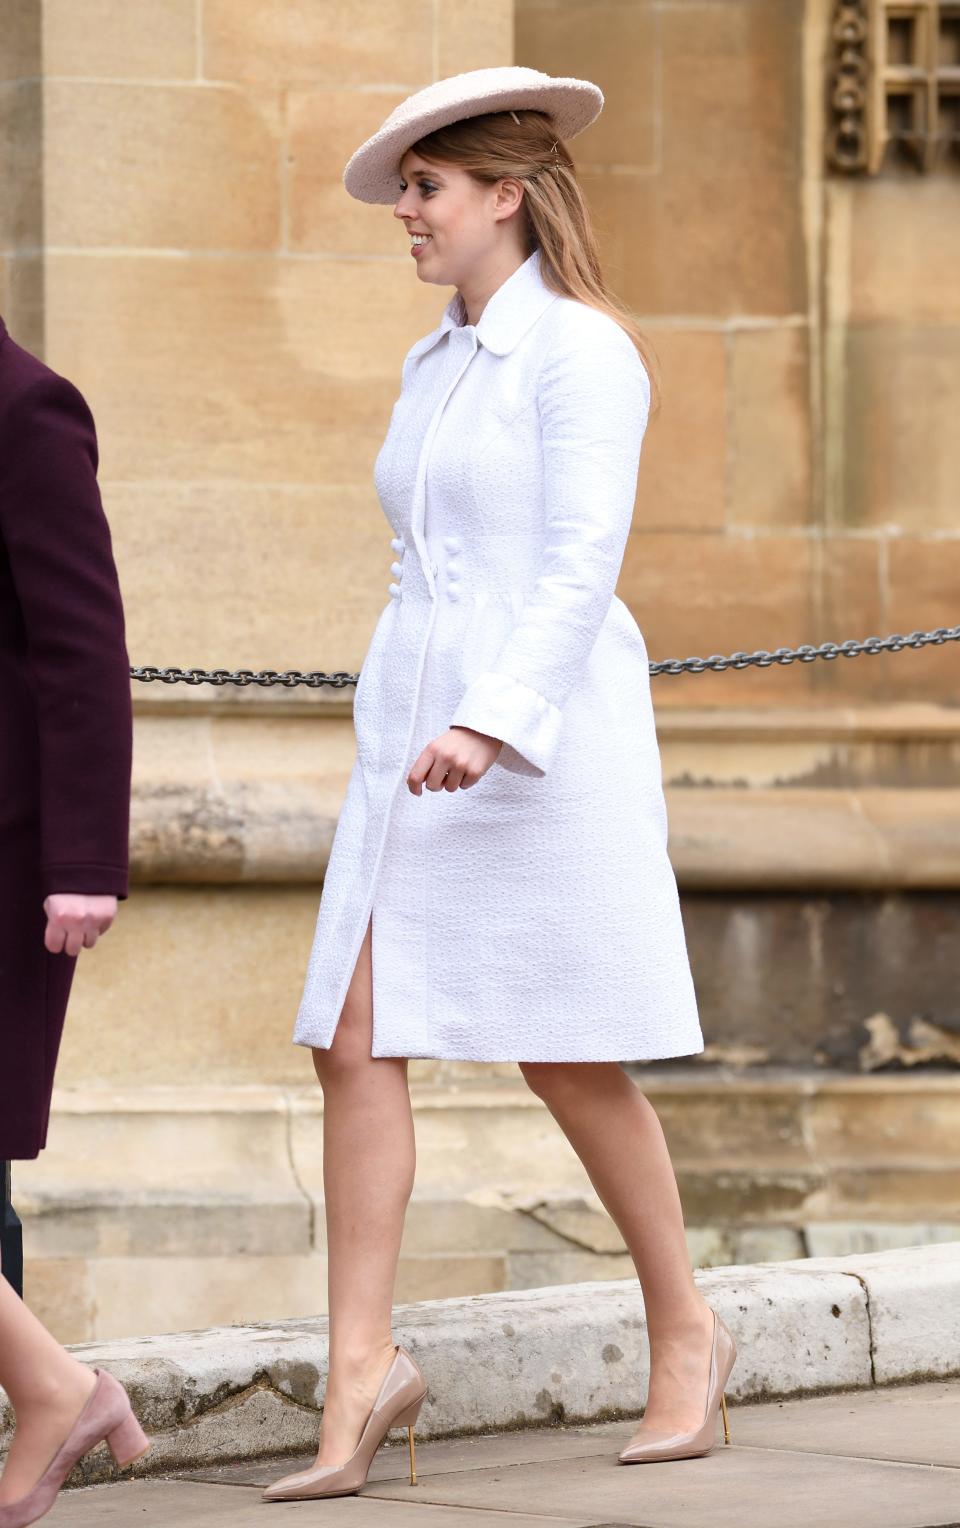 Princess Beatrice of York attends an Easter Service at St George's Chapel on April 1, 2018